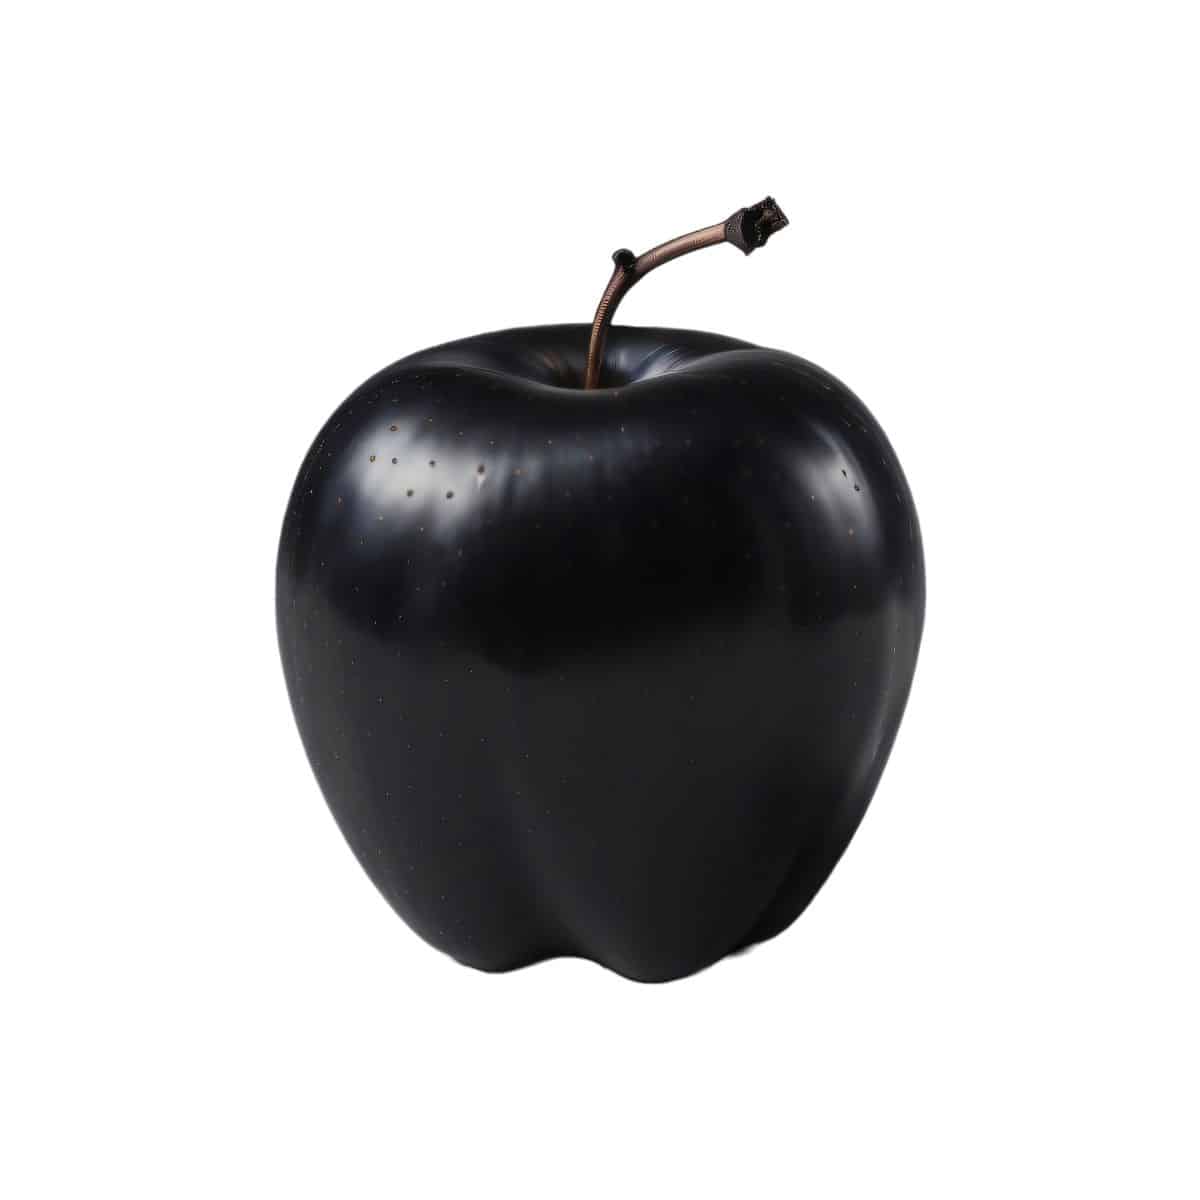 A black apple on a white background.